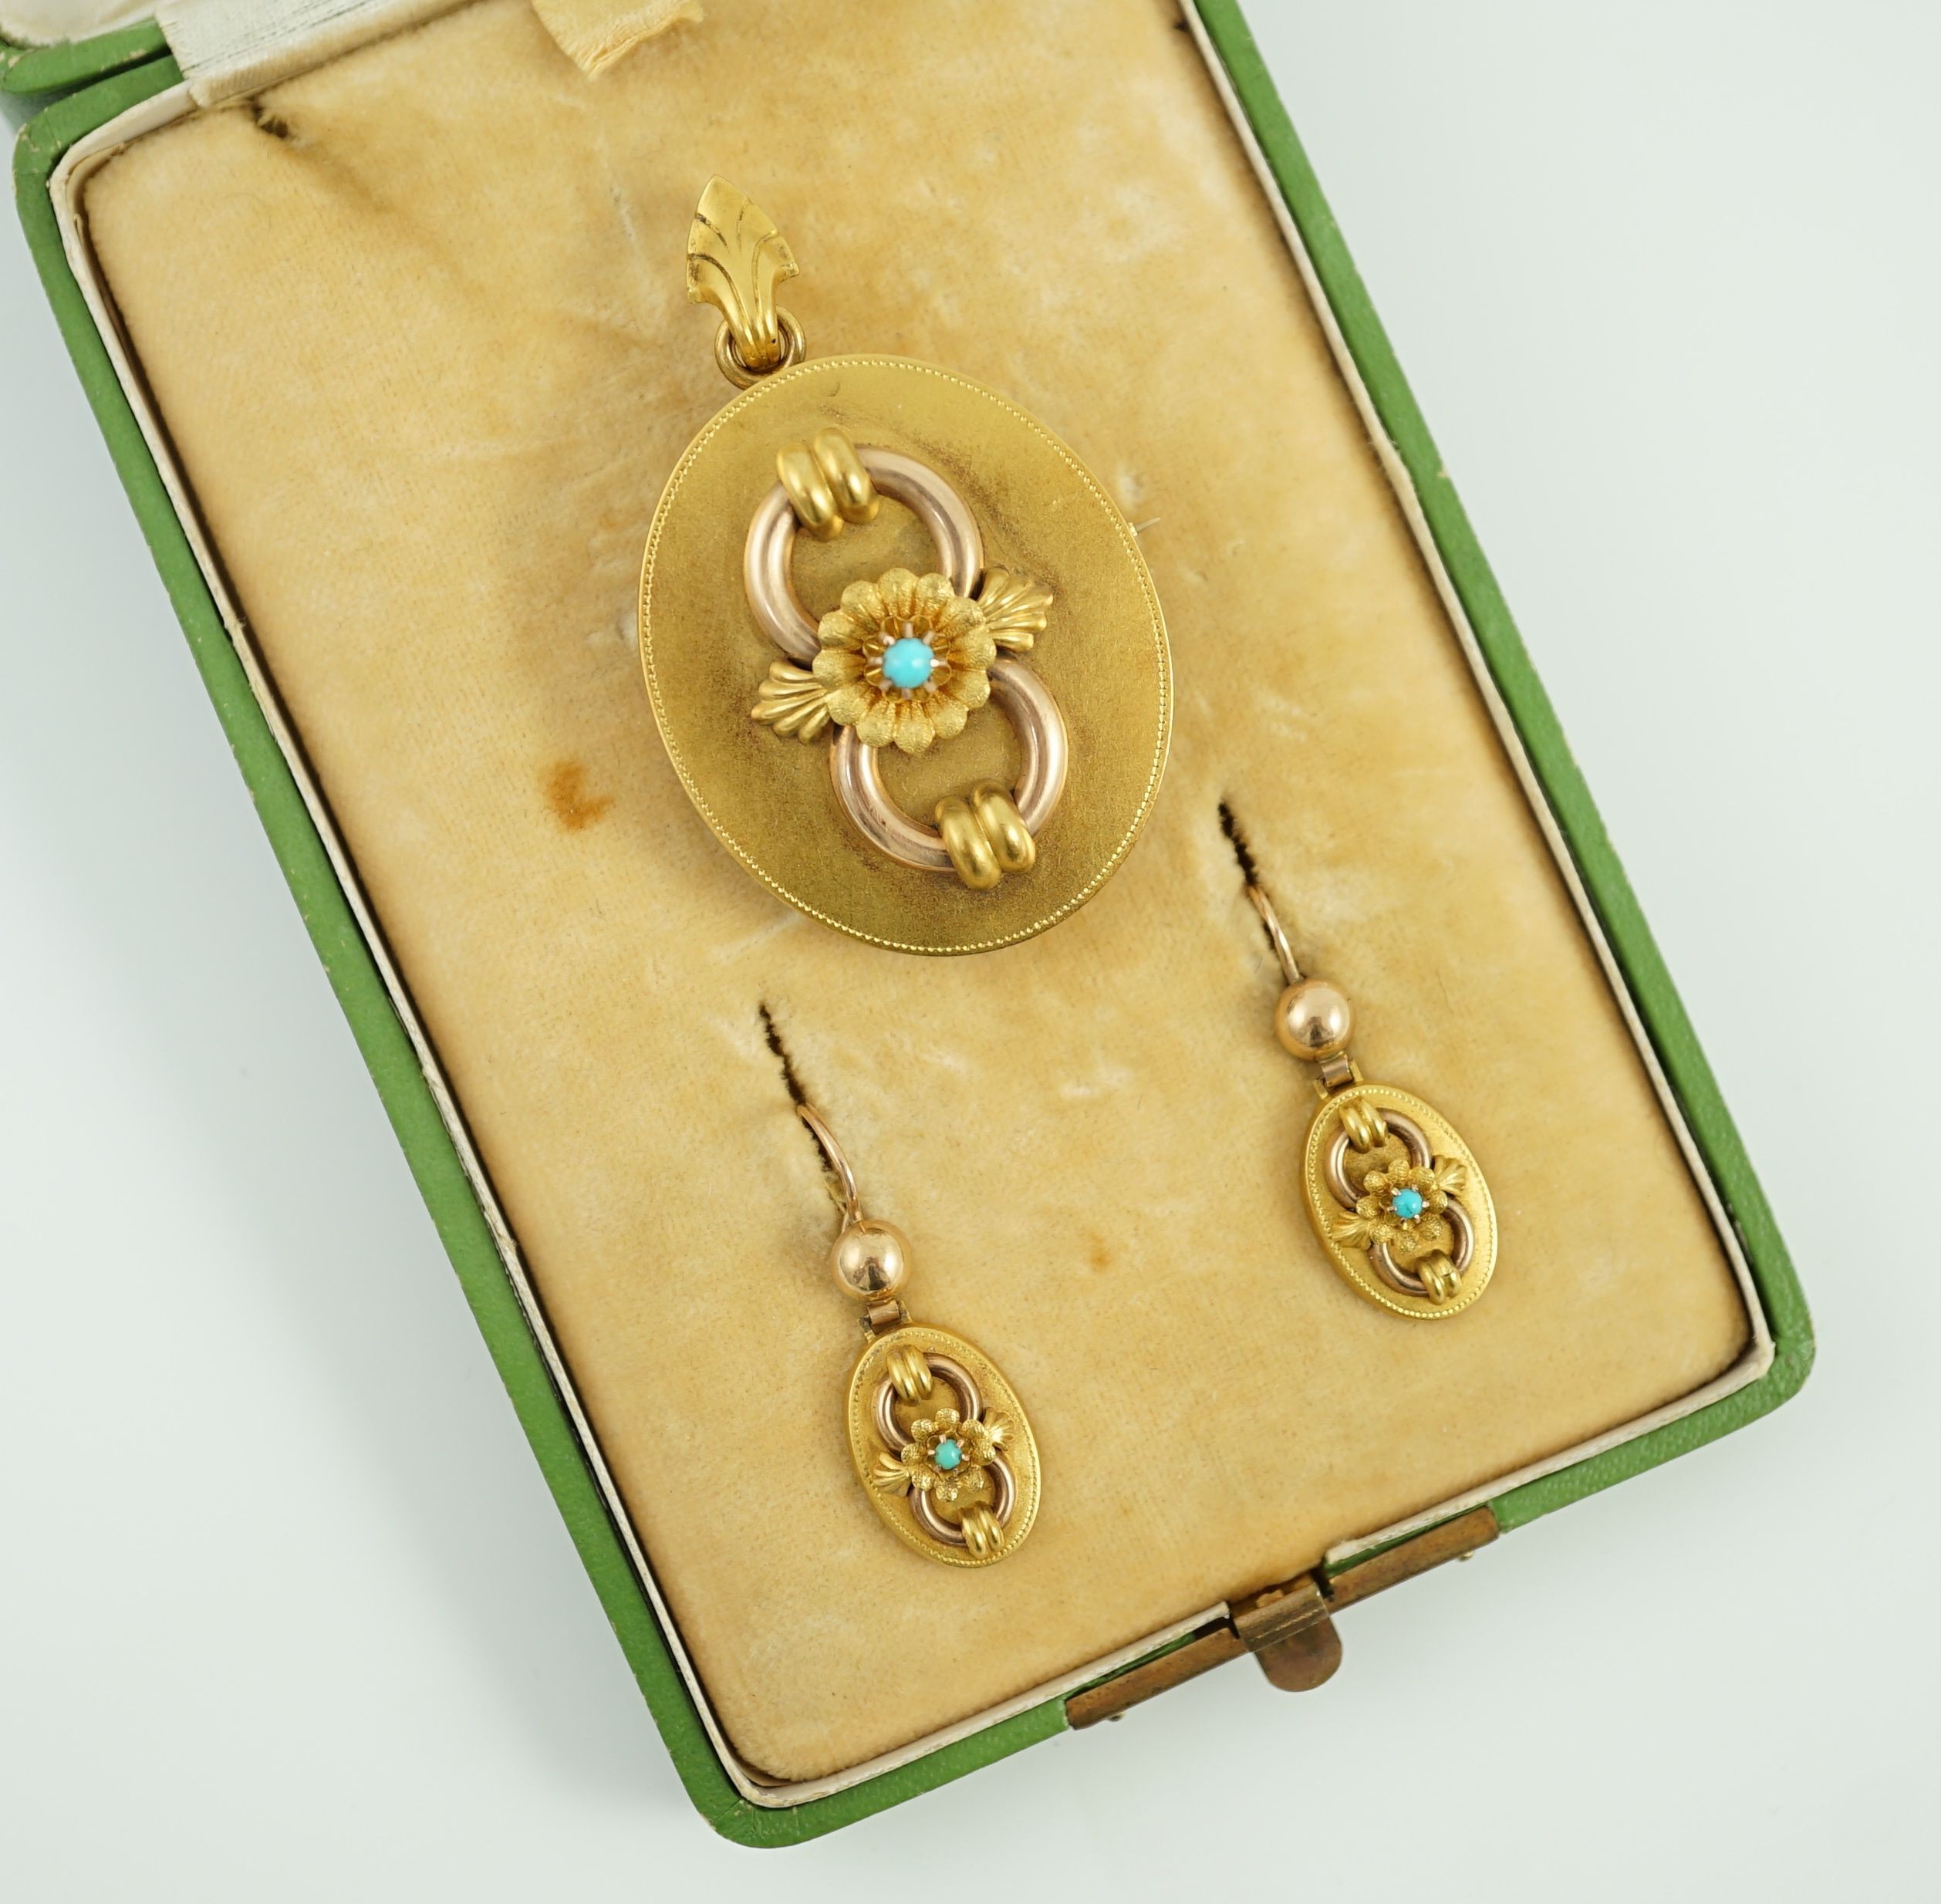 A late 19th century Austro-Hungarian 14k gold and turquoise set demi parure